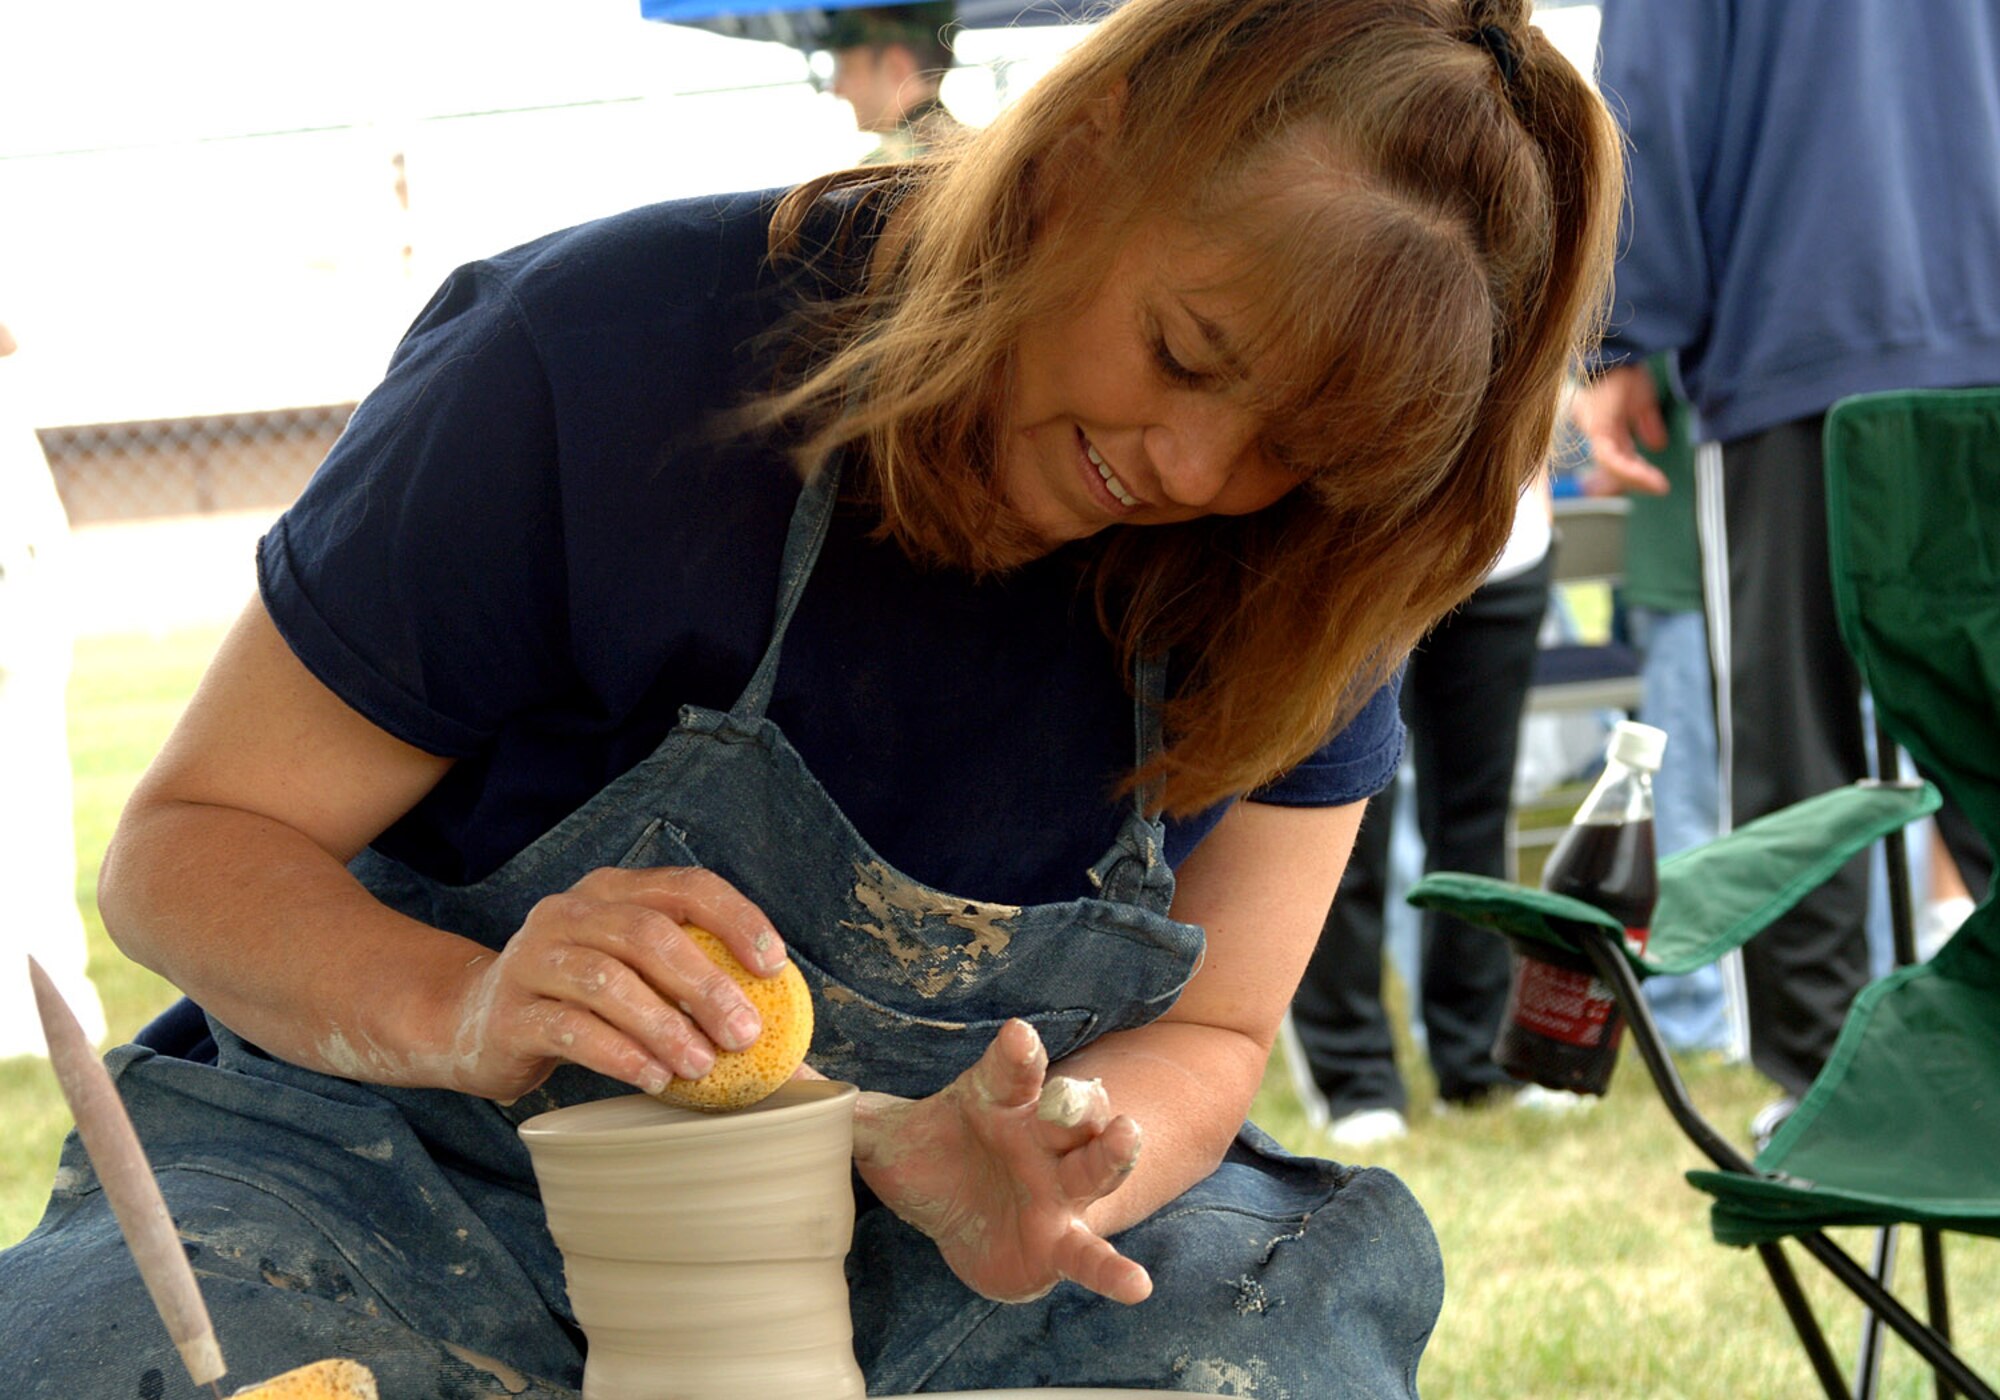 Debbie Sumner demonstrates the delicate hobby of pottery making. Pottery was one of many demonstration and vendor booths set up during Summer Bash. (U.S. Air Force photo/Senior Airman SerMae Lampkin)